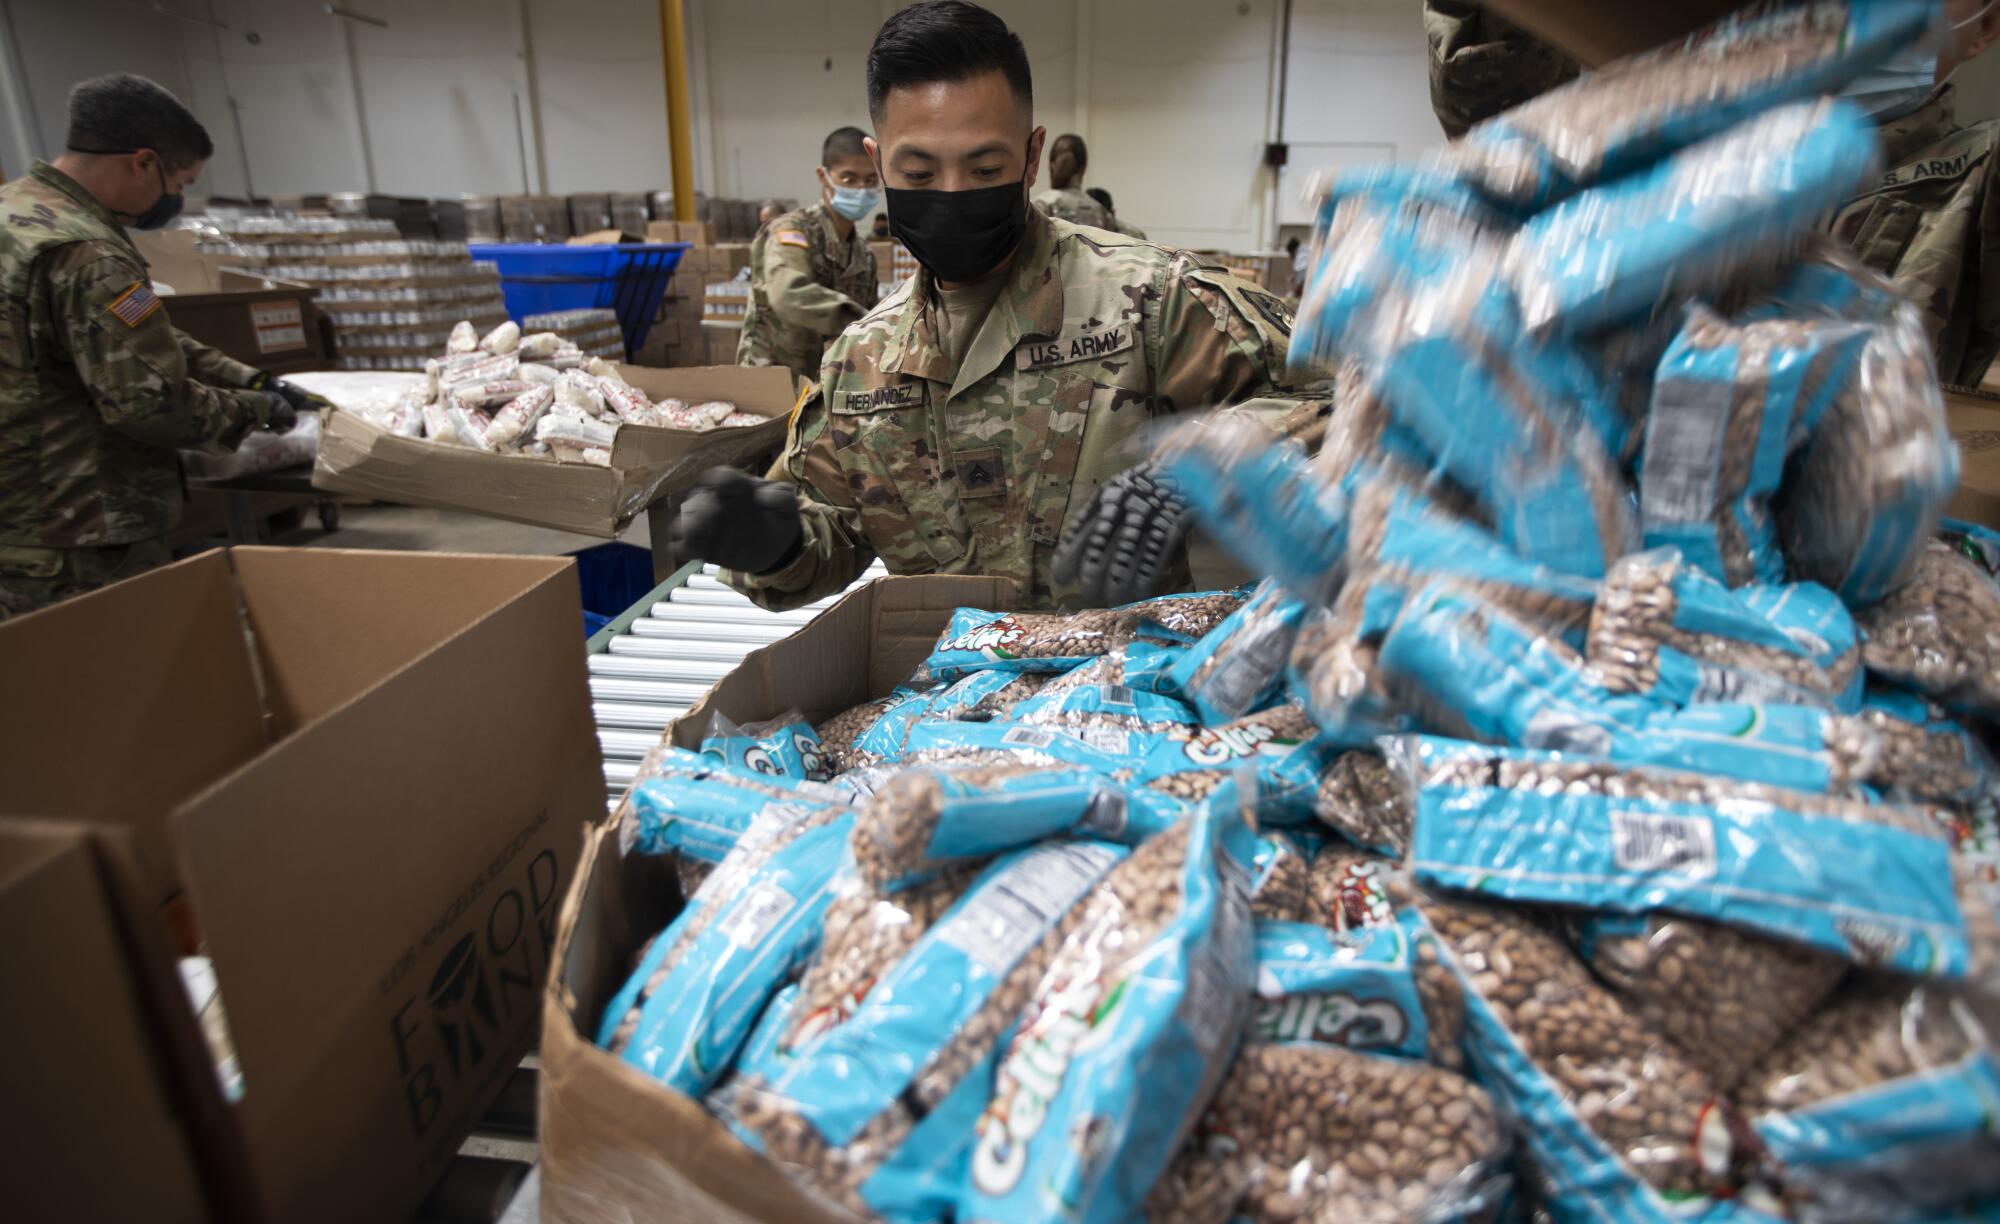 A National Guardsman stands in front of a box full of packaged nuts.